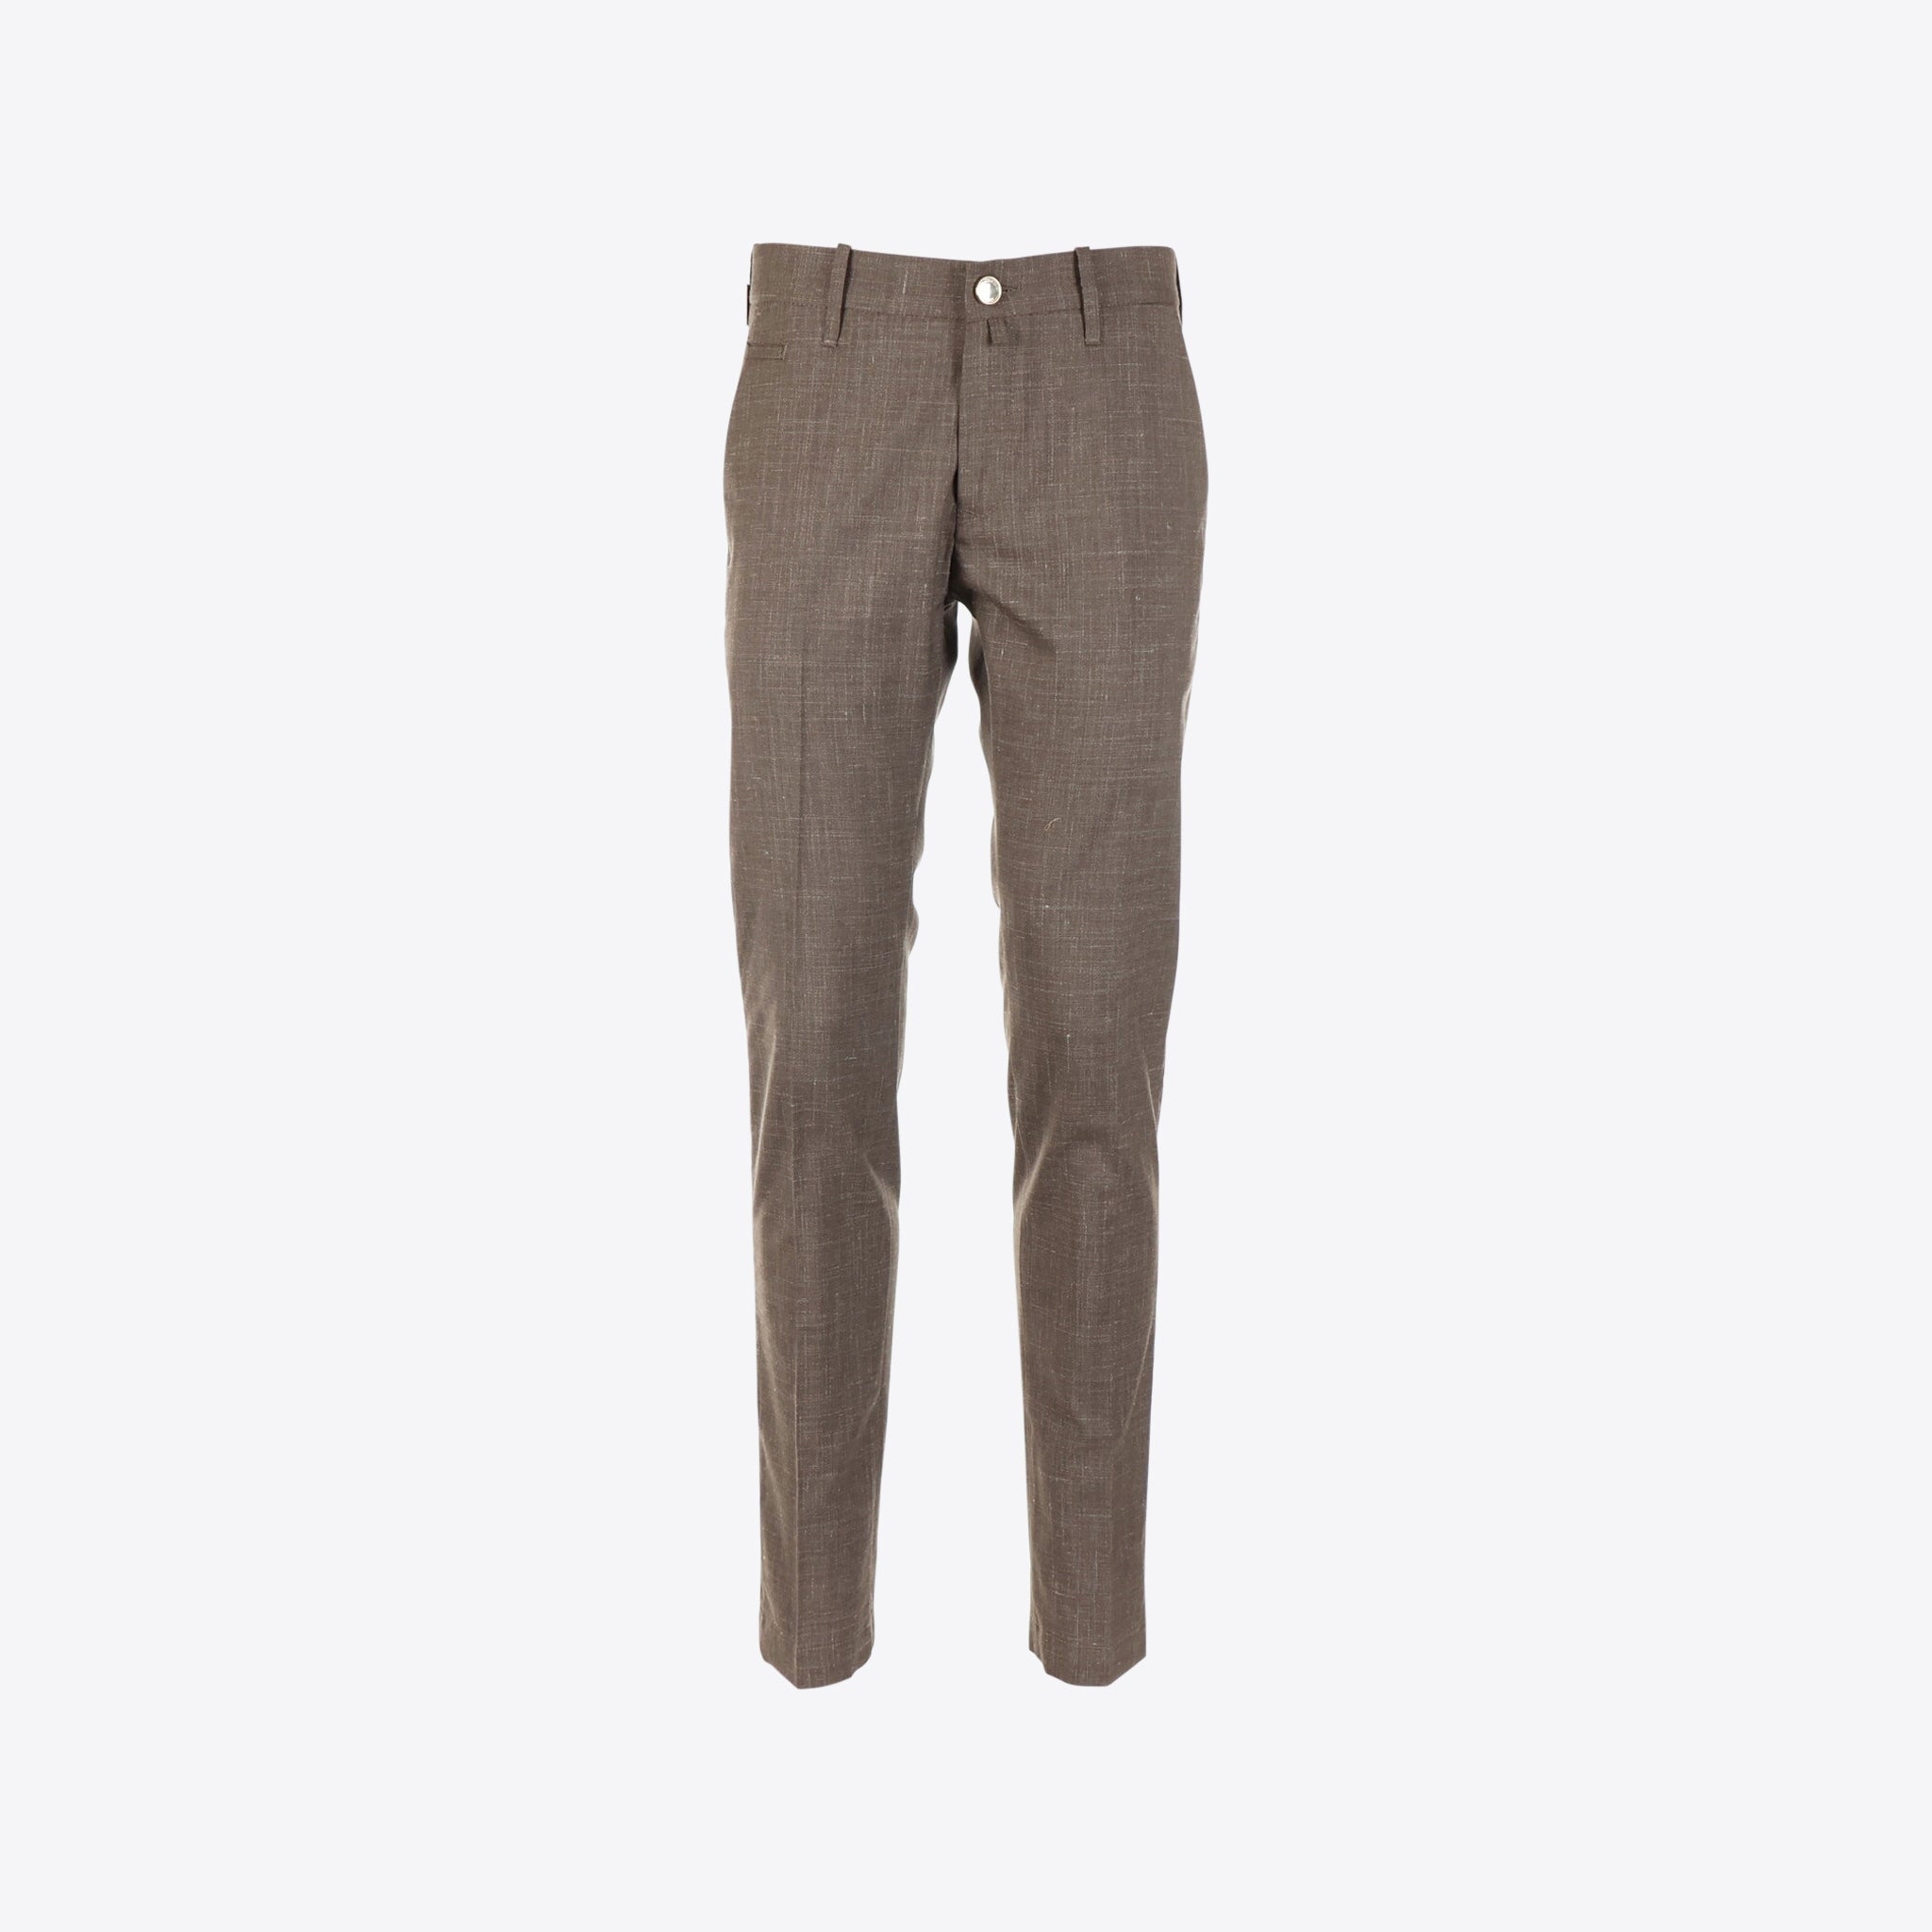 Jacob Cohen Broek Stof Taupe